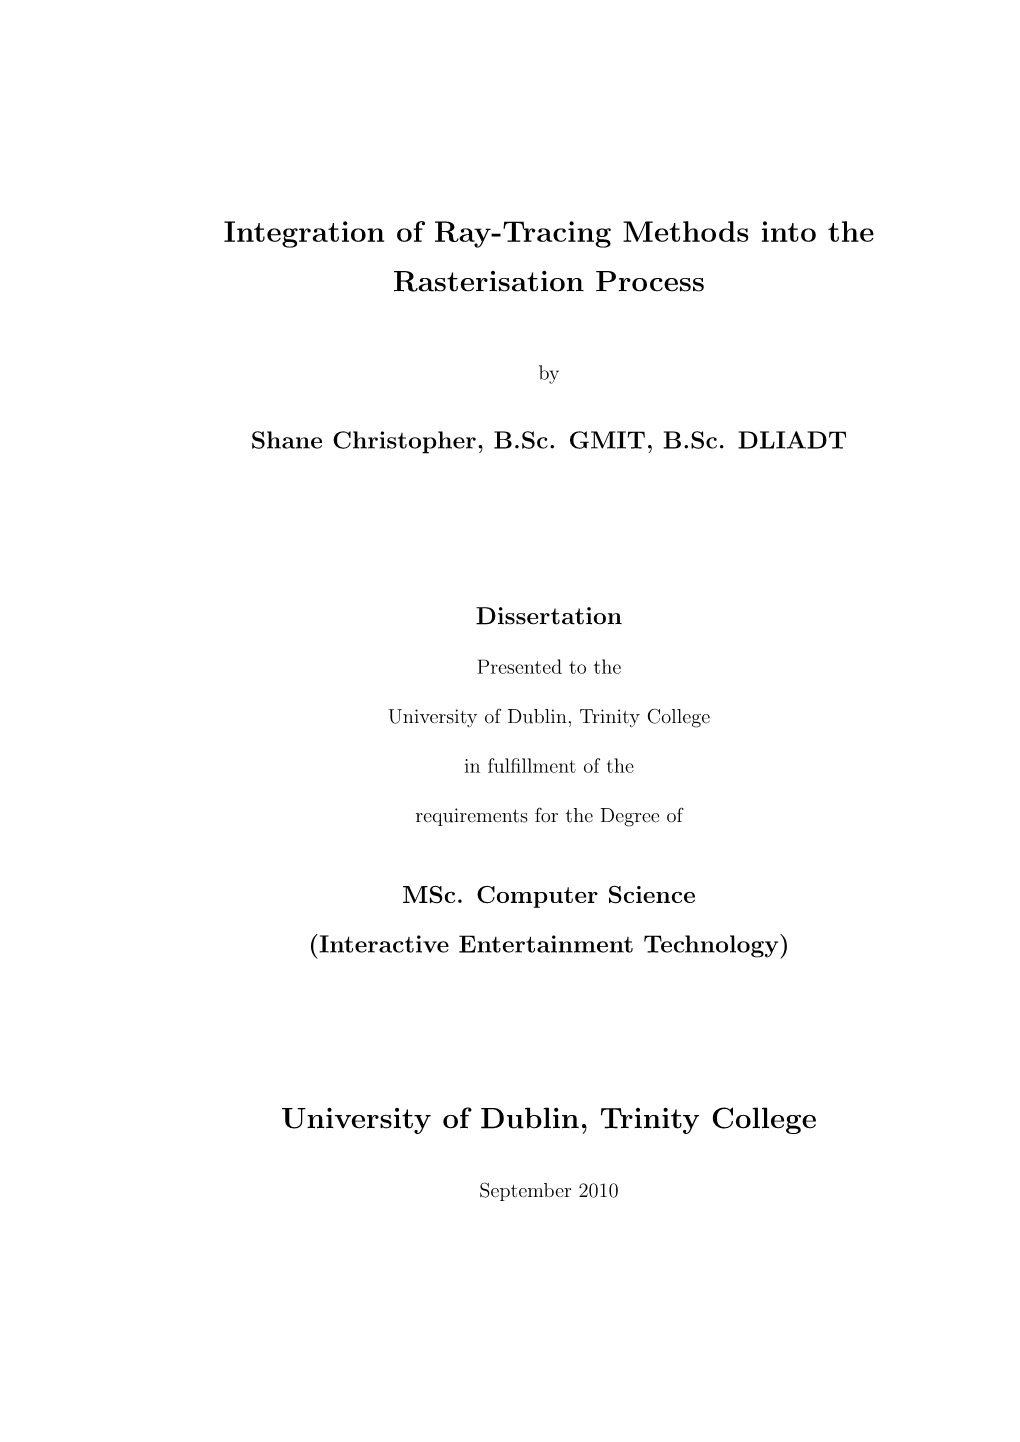 Integration of Ray-Tracing Methods Into the Rasterisation Process University of Dublin, Trinity College